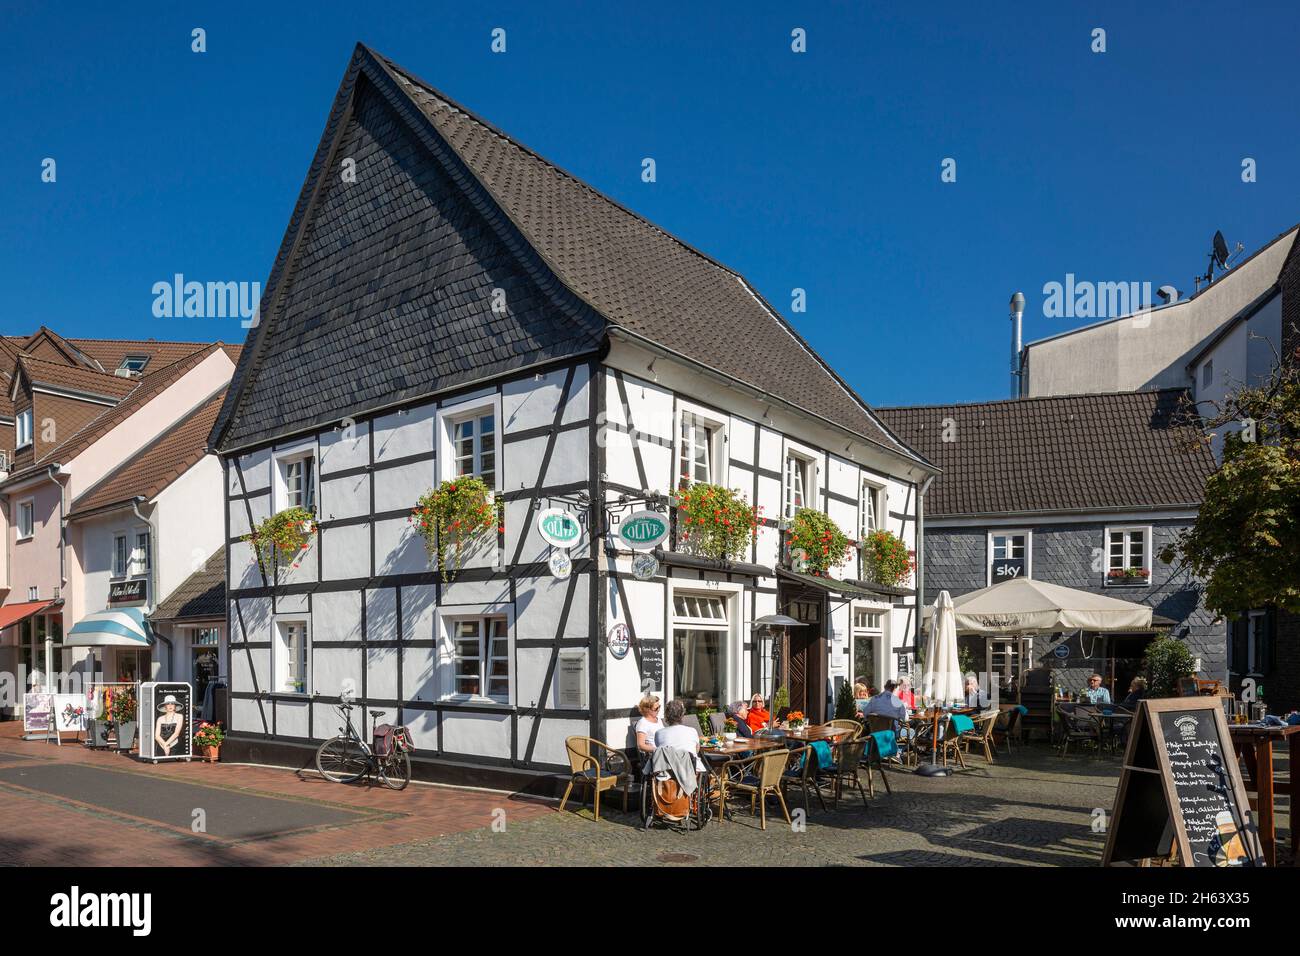 germany,hilden,bergisches land,niederbergisches land,niederberg,rhineland,north rhine-westphalia,nrw,half-timbered house markt 6,restaurant,people sitting at tables in the street cafe Stock Photo